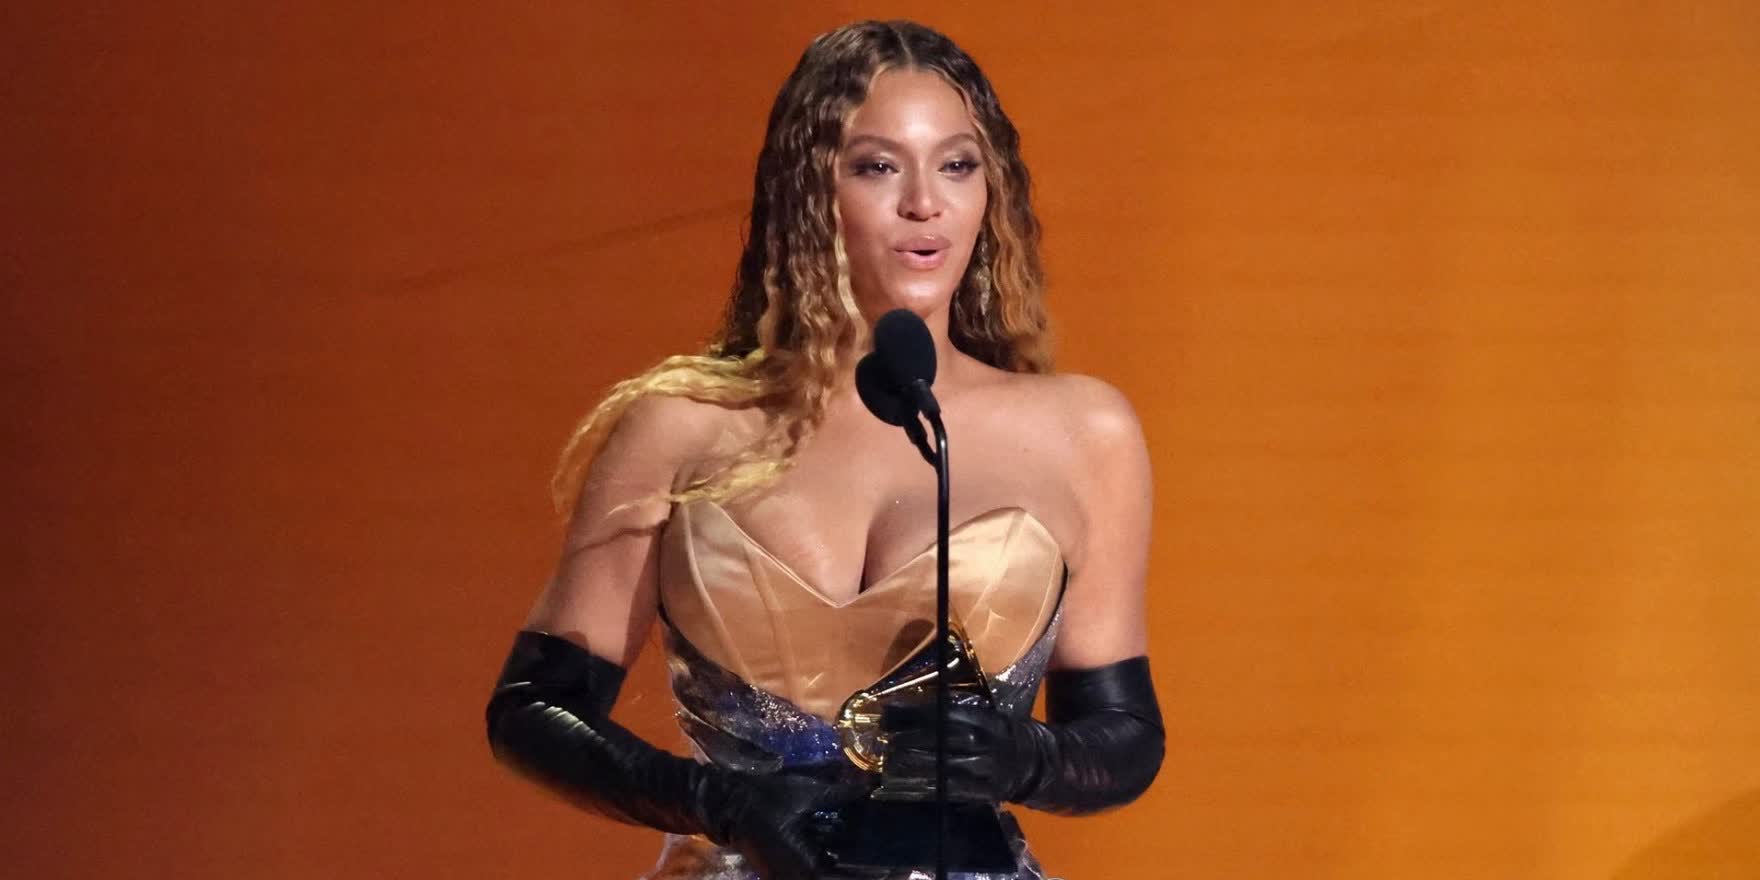 Grammys: Beyoncé breaks all-time wins record, Harry Styles claims album honor